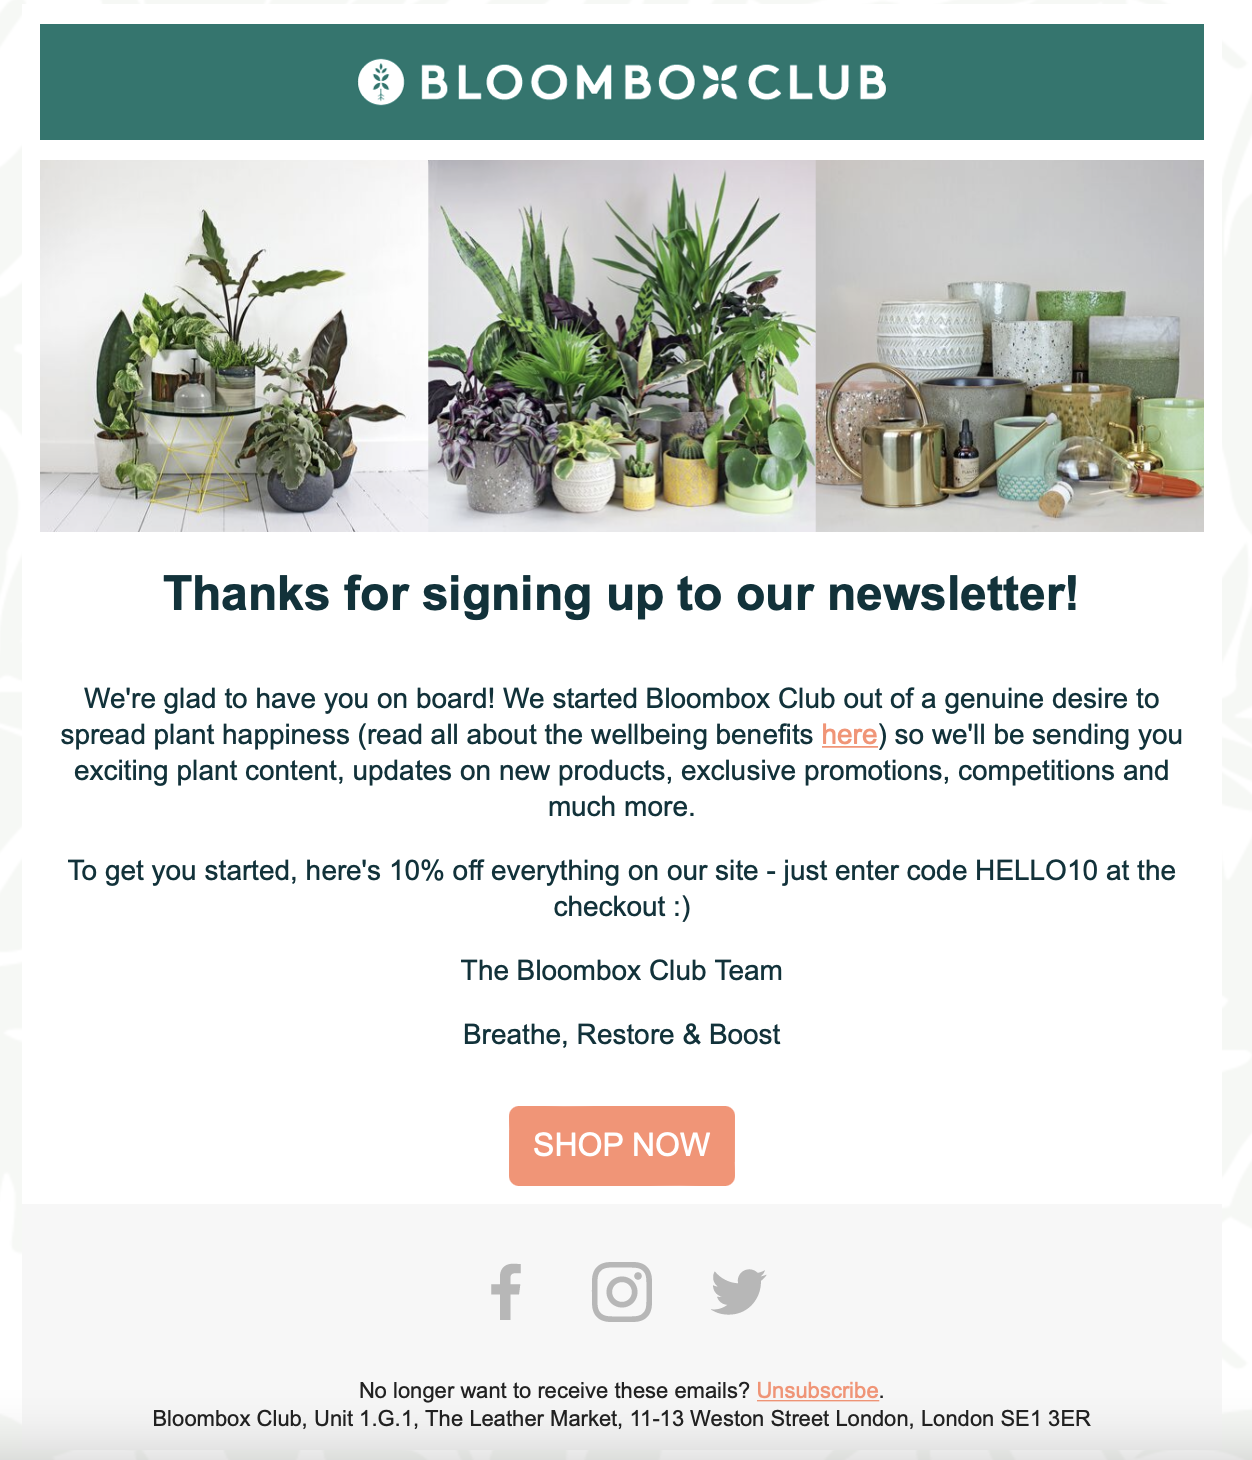 Bloombox email marketing example